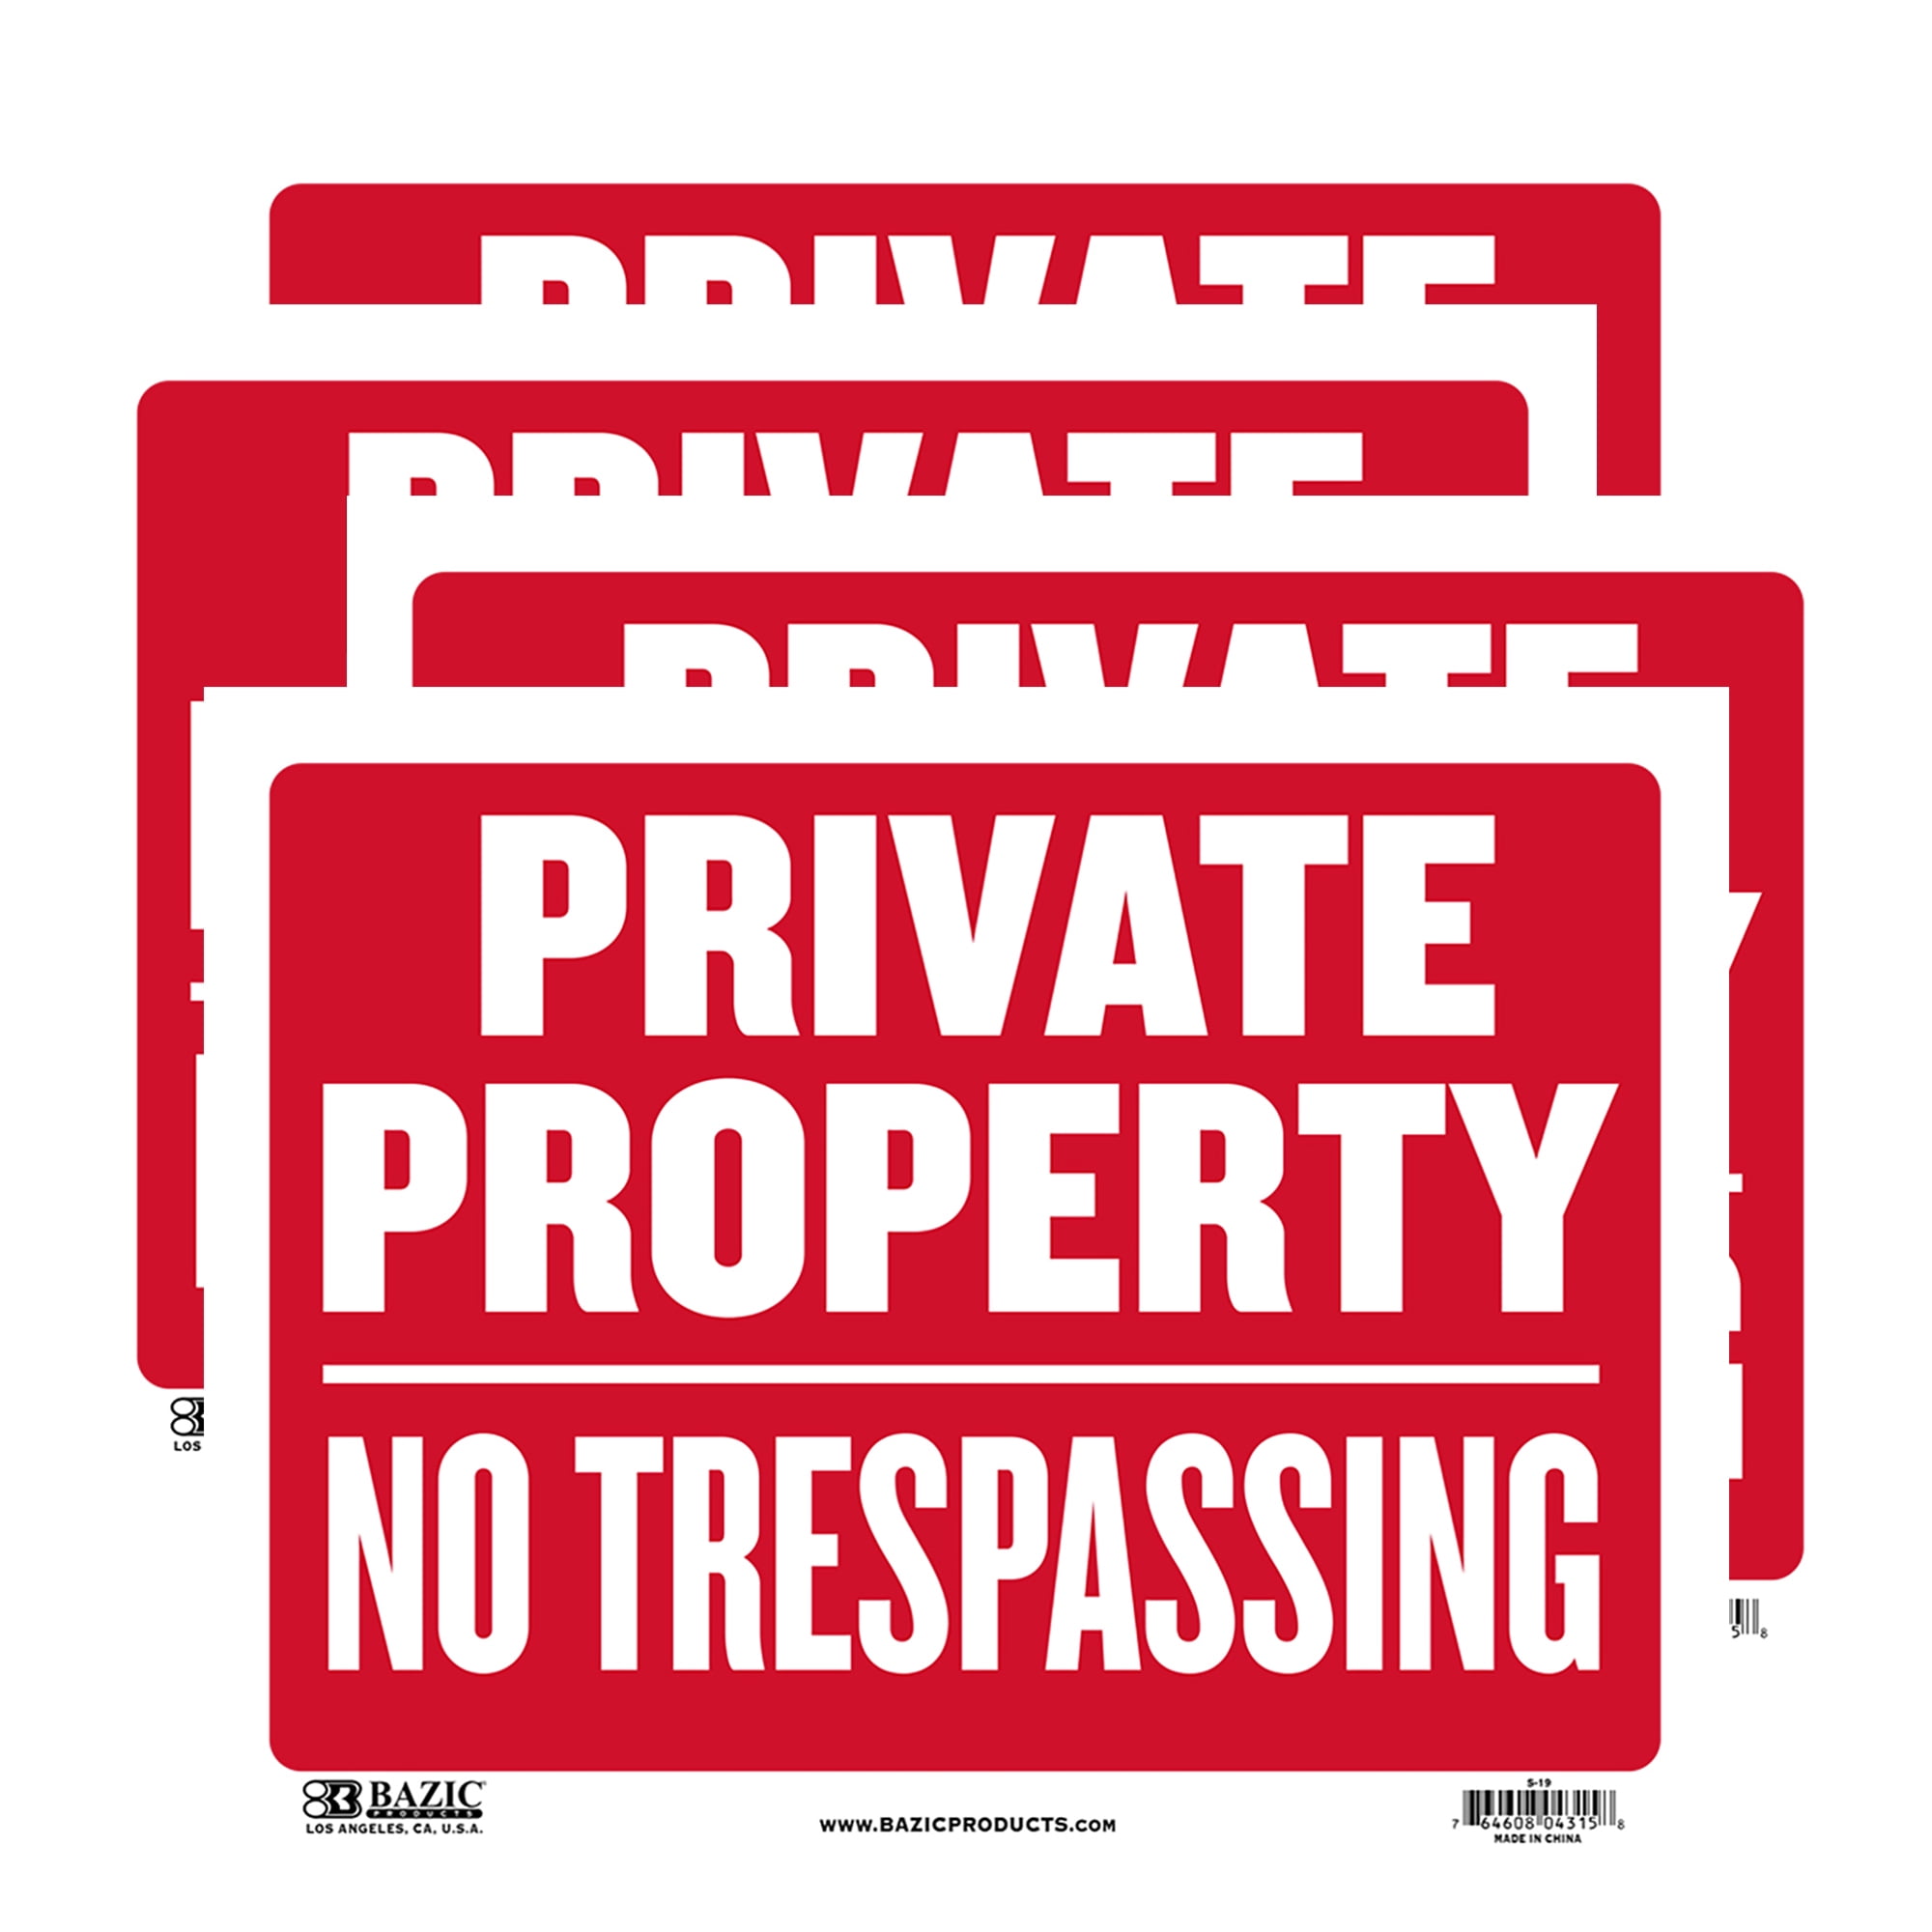 4 PRIVATE ROAD NO TRESPASSING  w/Stakes  8"x12" Plastic Coroplast  Safety w 